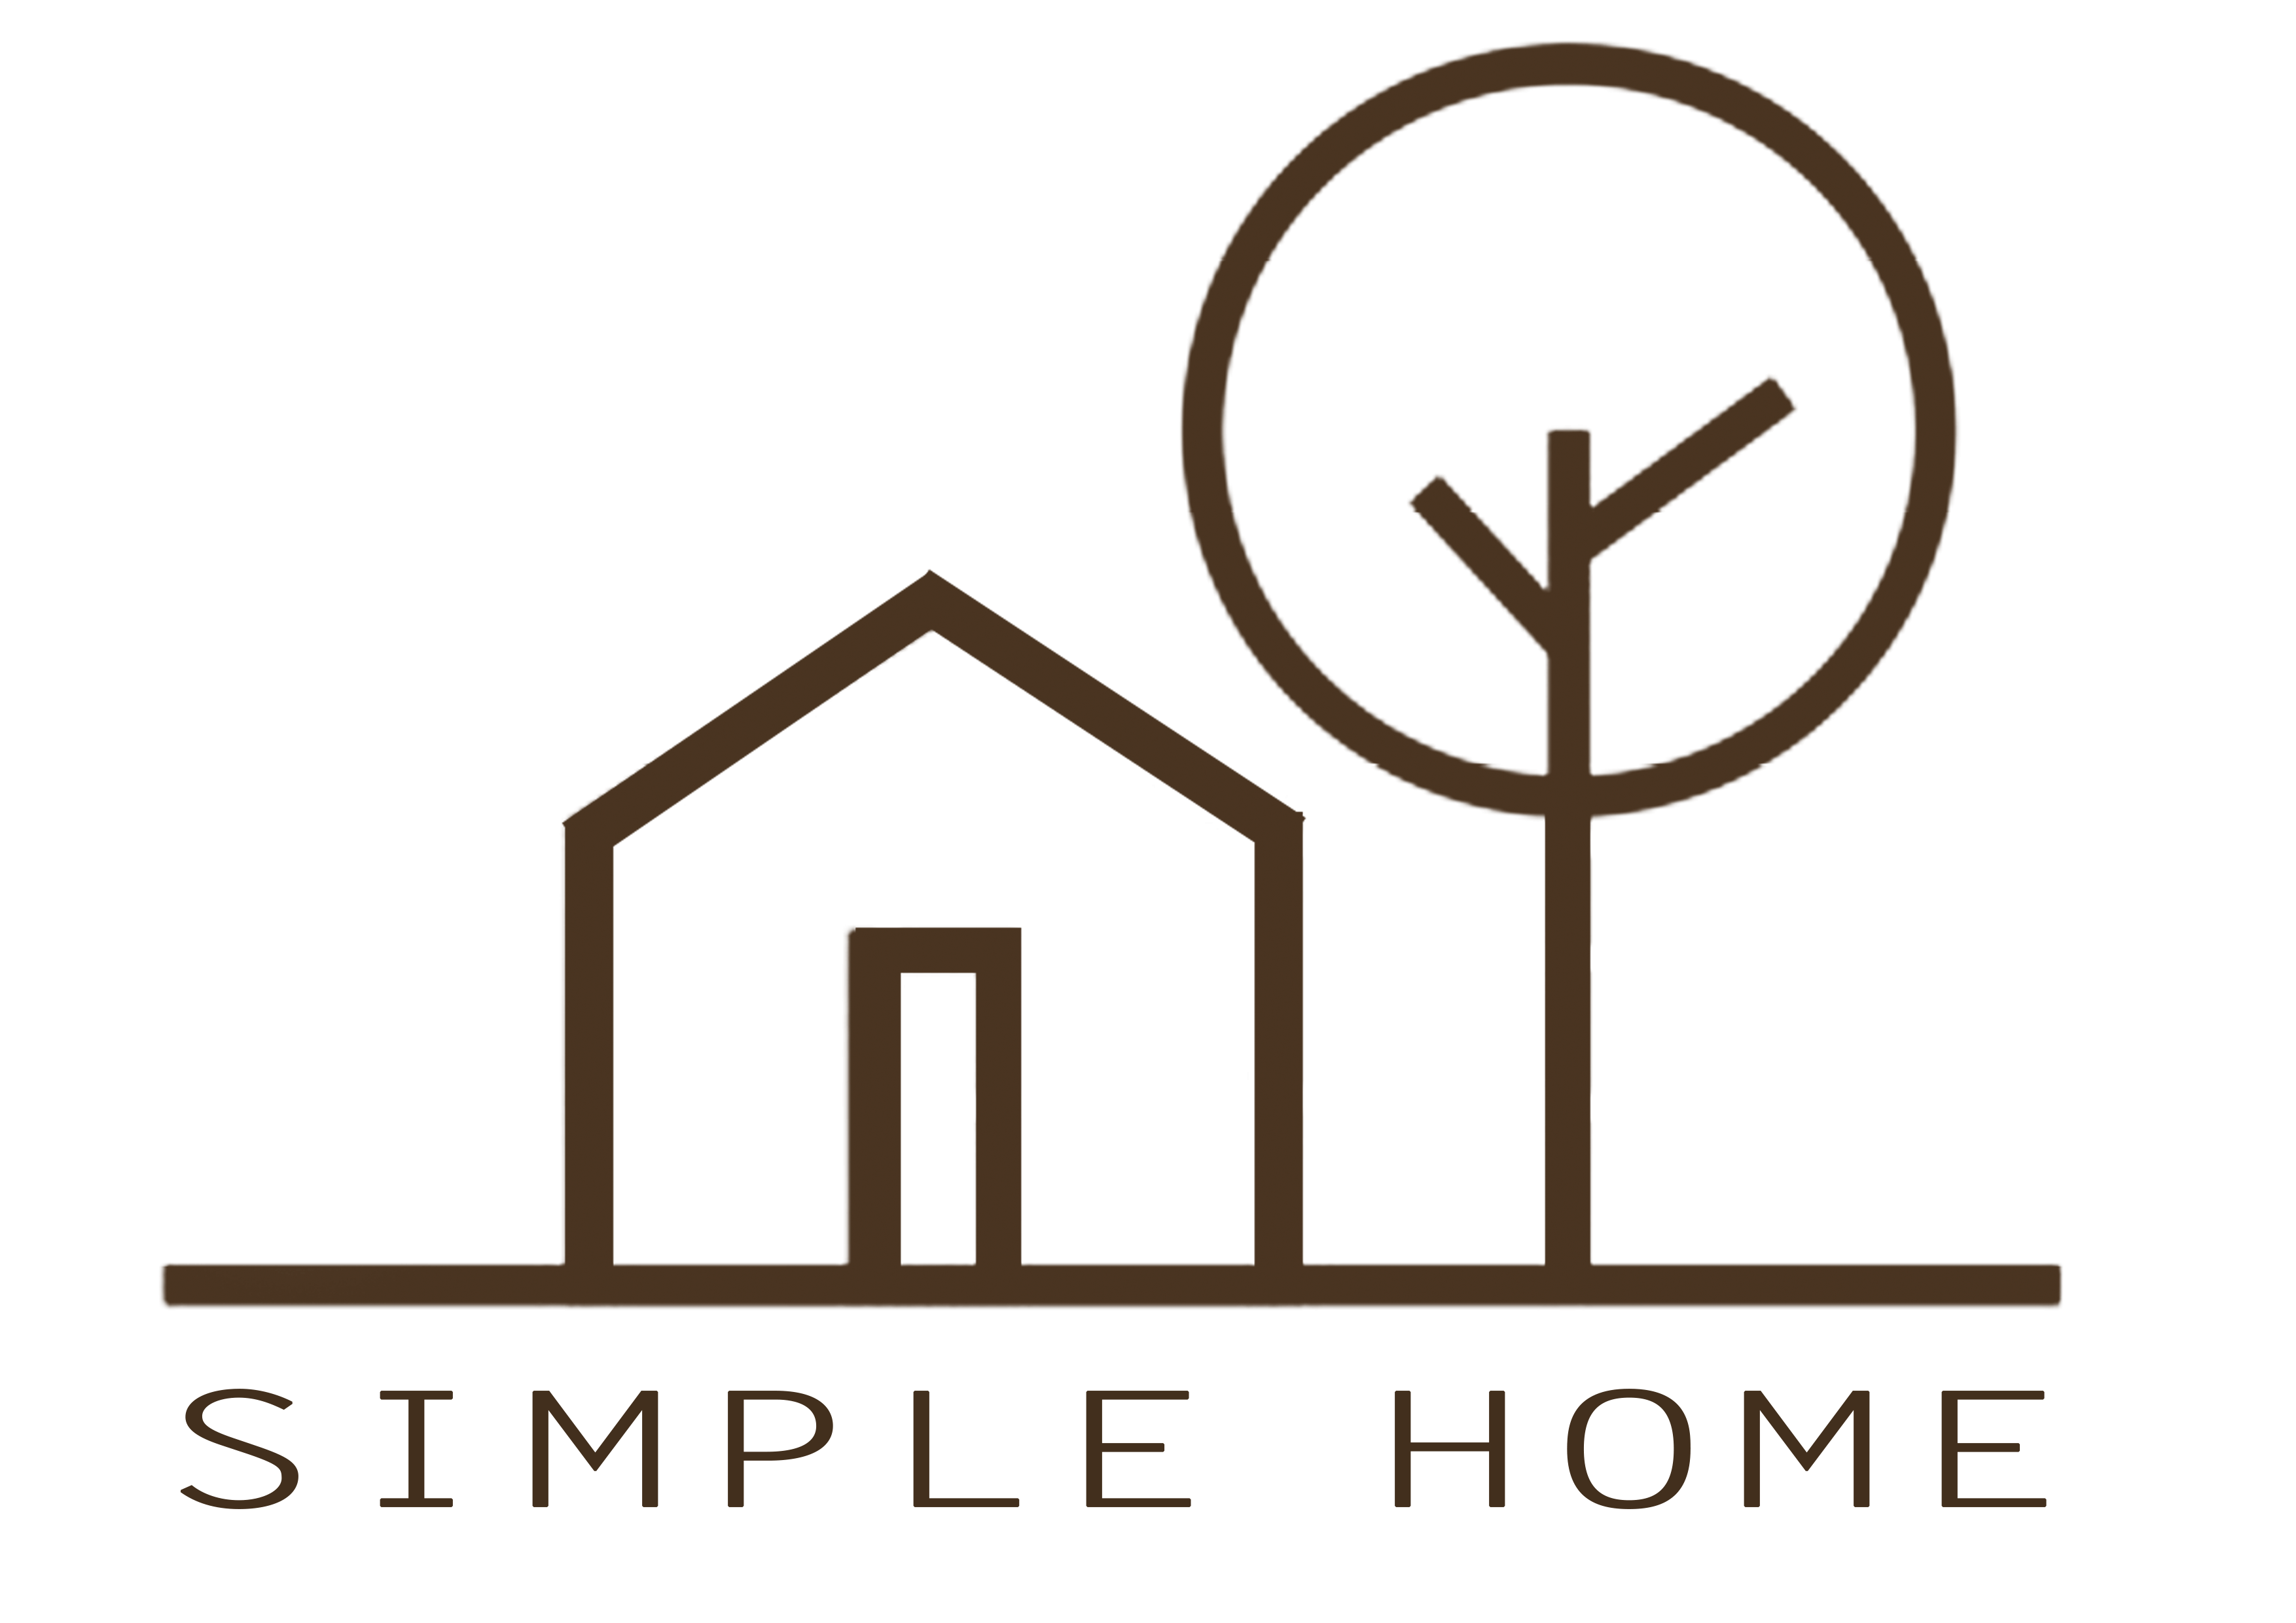 Simplehome